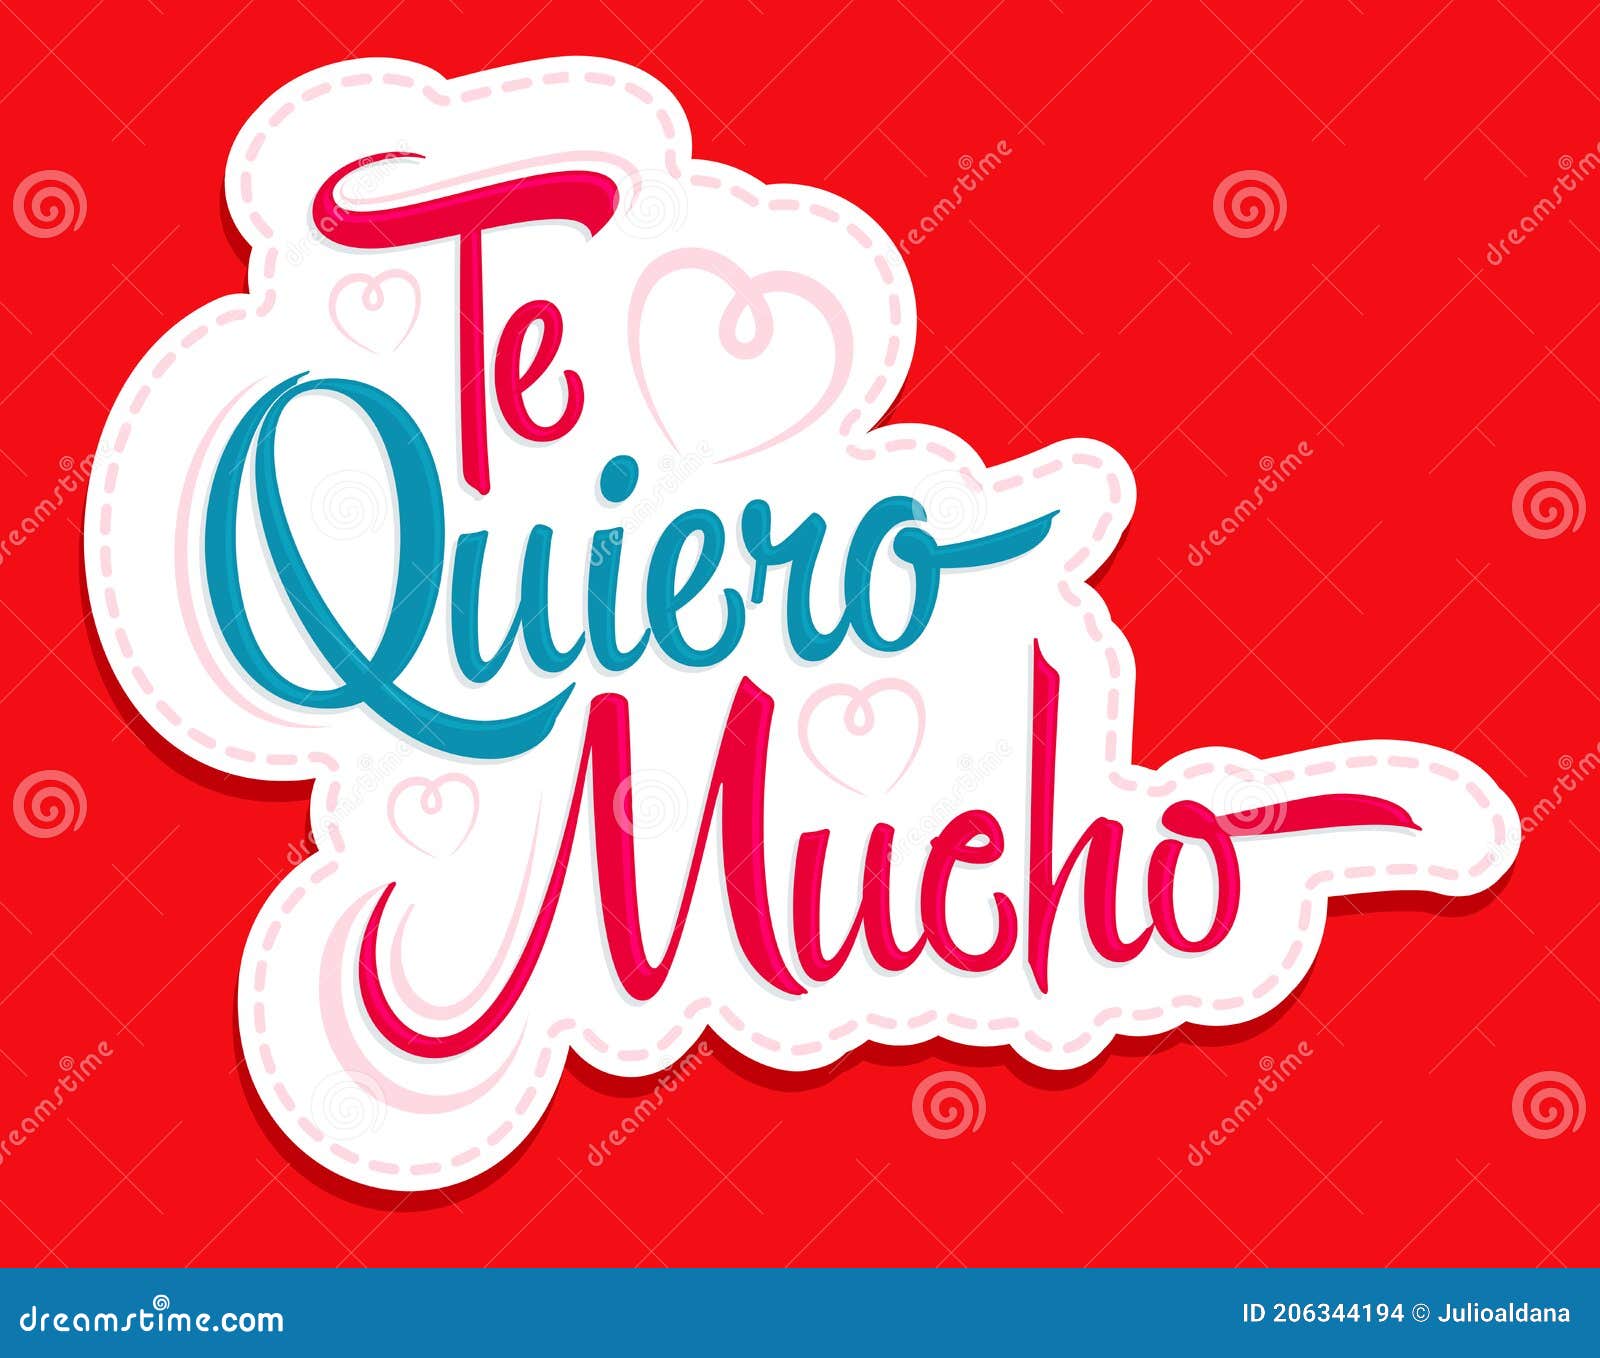 te quiero mucho, i love you so much spanish text,  lettering .